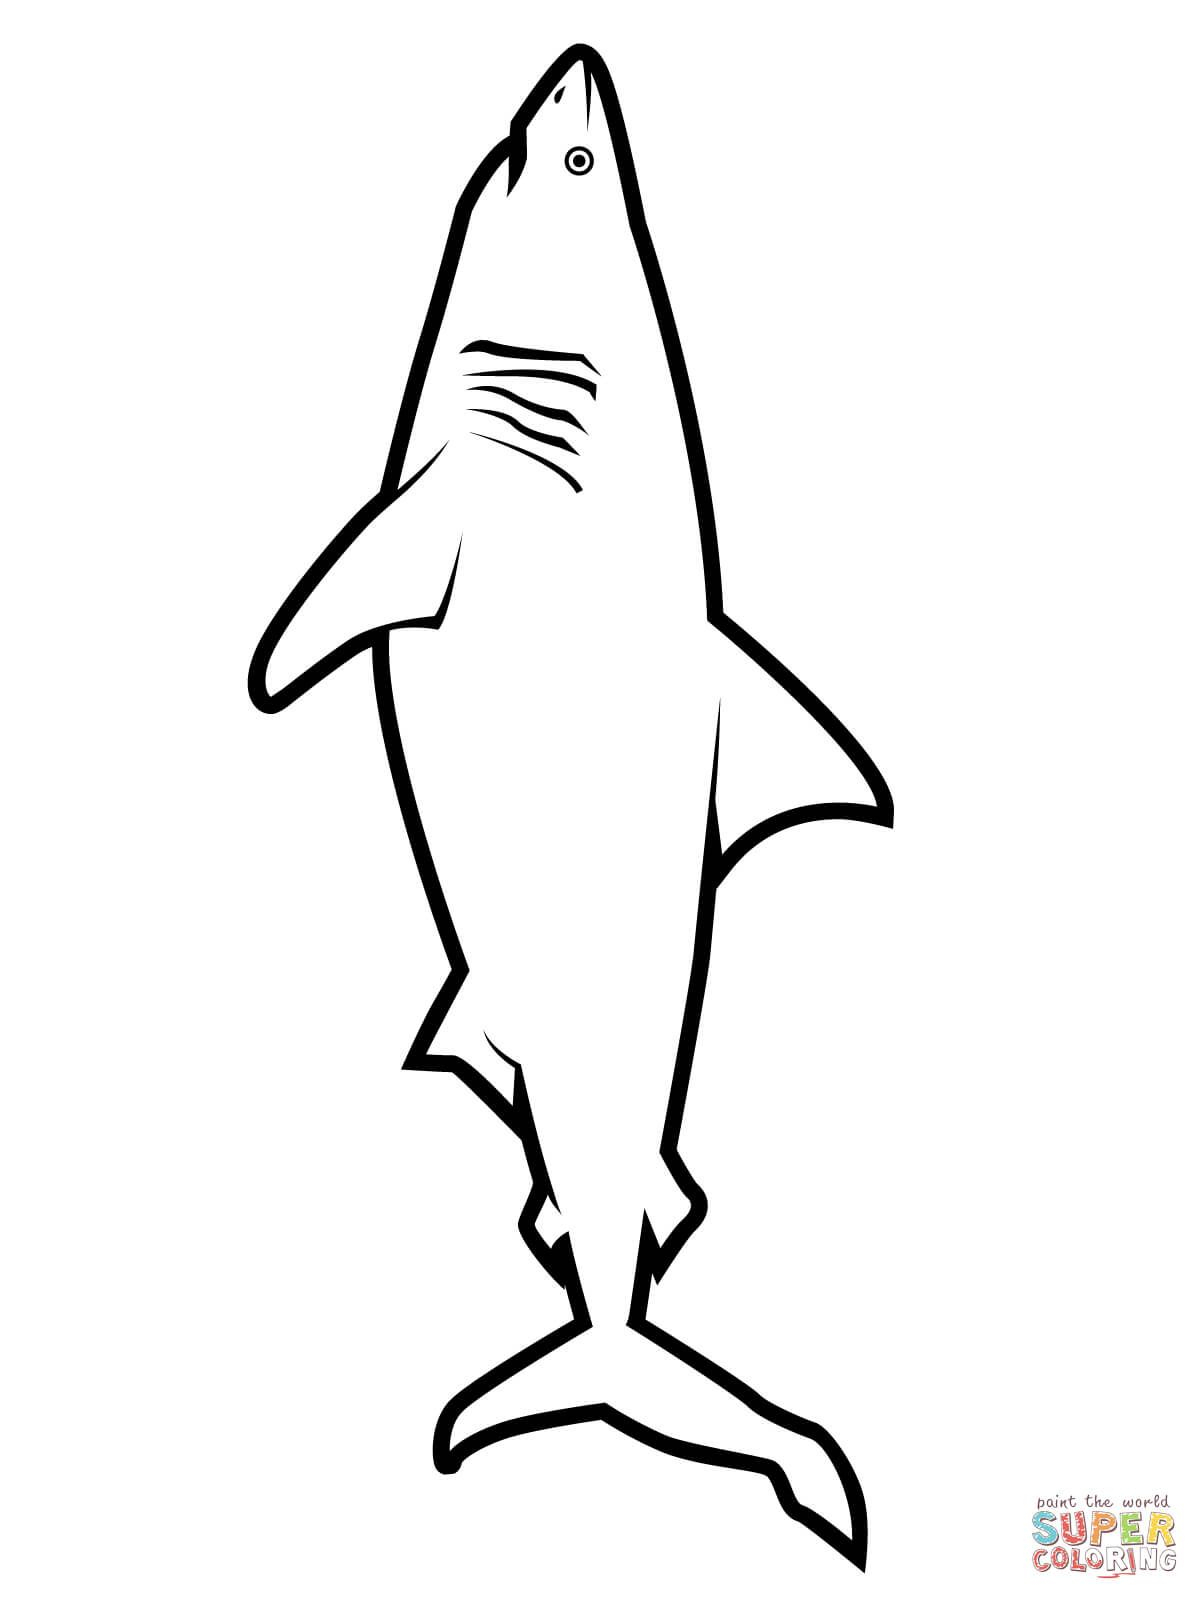 Realistic Great White Shark Coloring Page | Free Printable Coloring - Free Printable Shark Coloring Pages